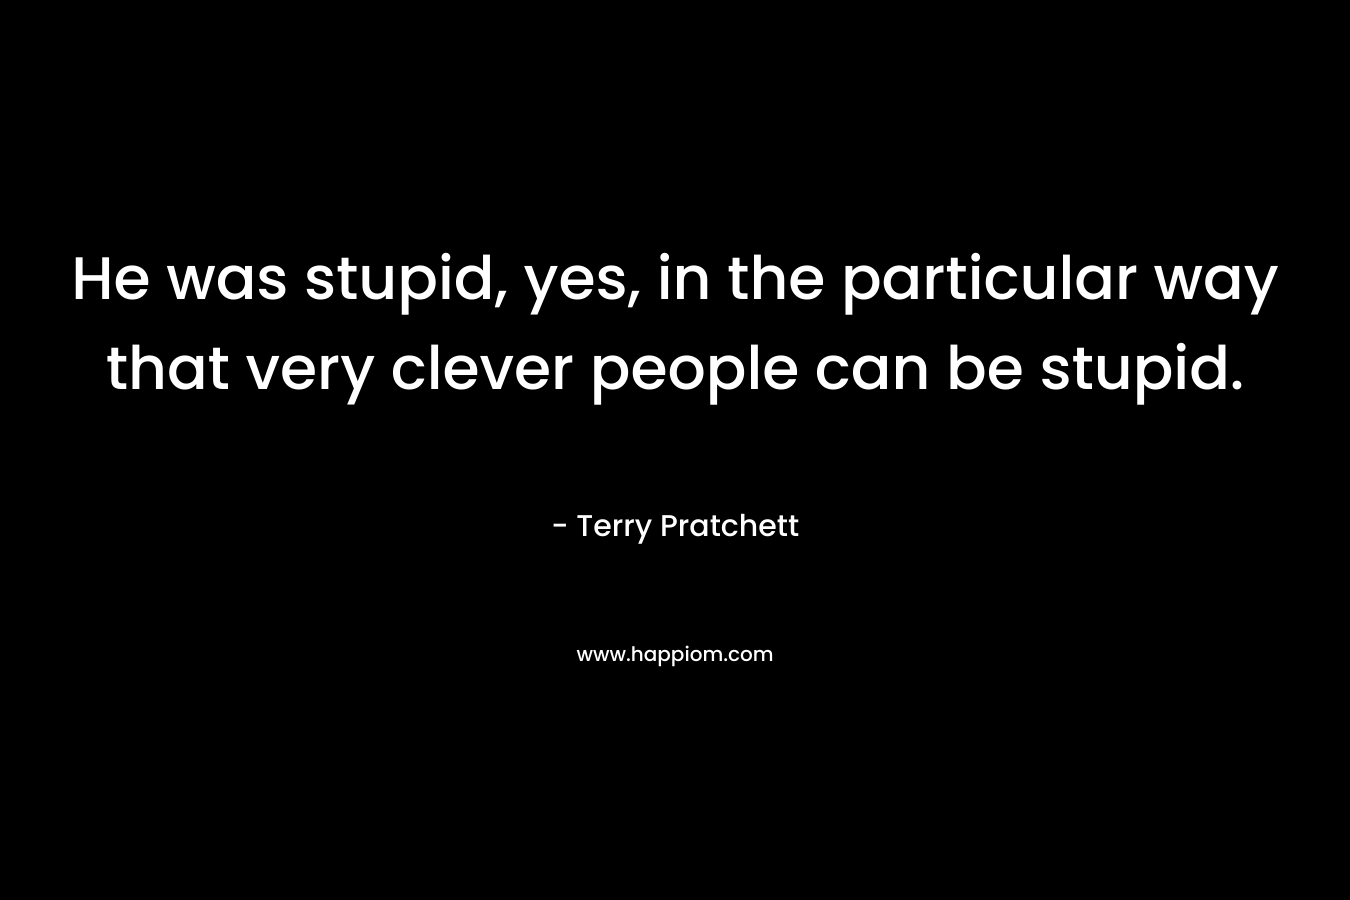 He was stupid, yes, in the particular way that very clever people can be stupid.